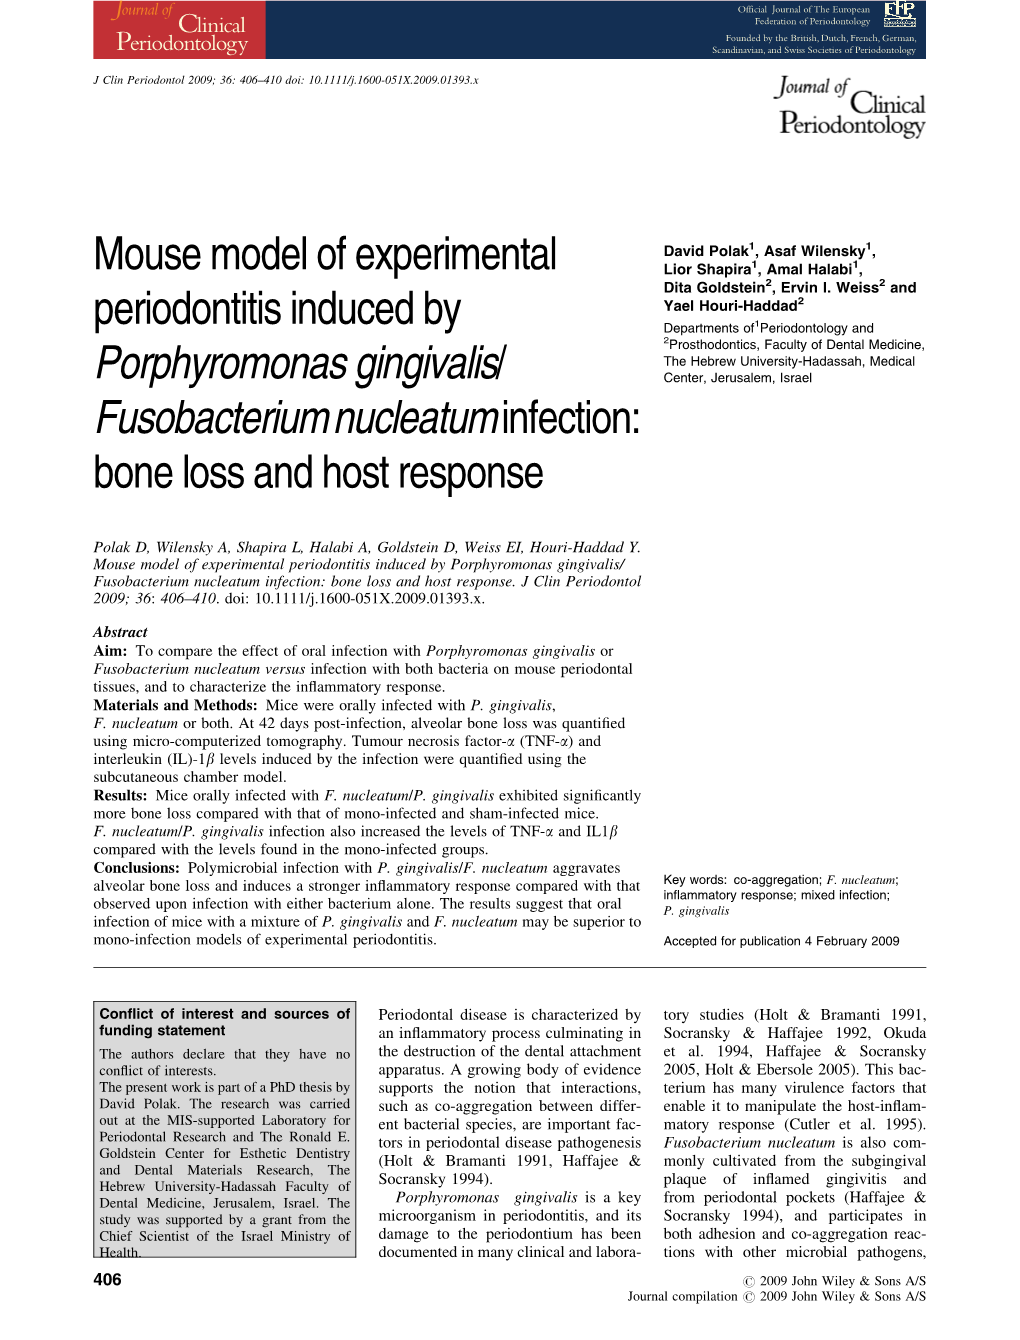 Mouse Model of Experimental Periodontitis Induced by Porphyromonas Gingivalis/ Fusobacterium Nucleatum Infection: Bone Loss and Host Response